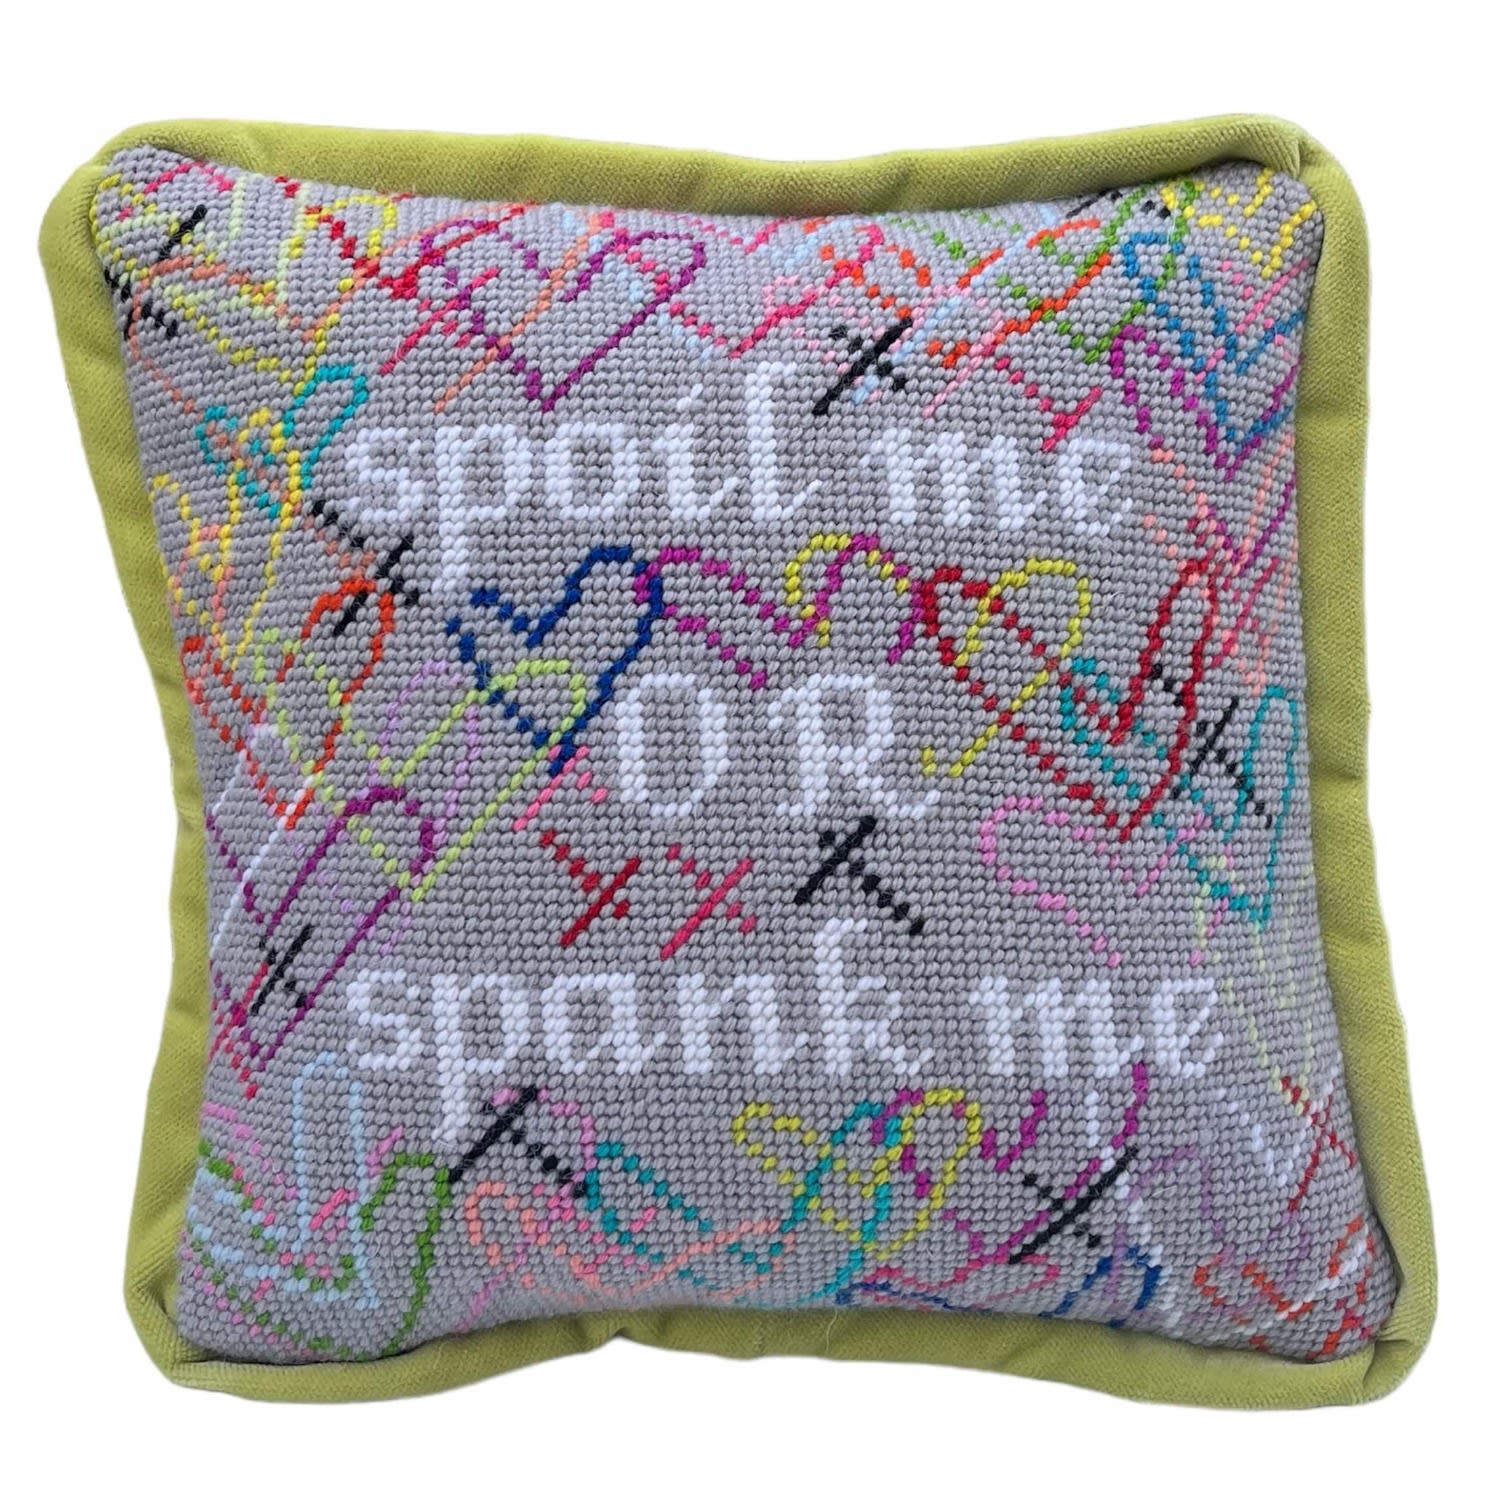 Hand-Embroidered "Spoil Me Or Spank Me" Needlepoint Pillow, One Of A Kind Mommani Threads